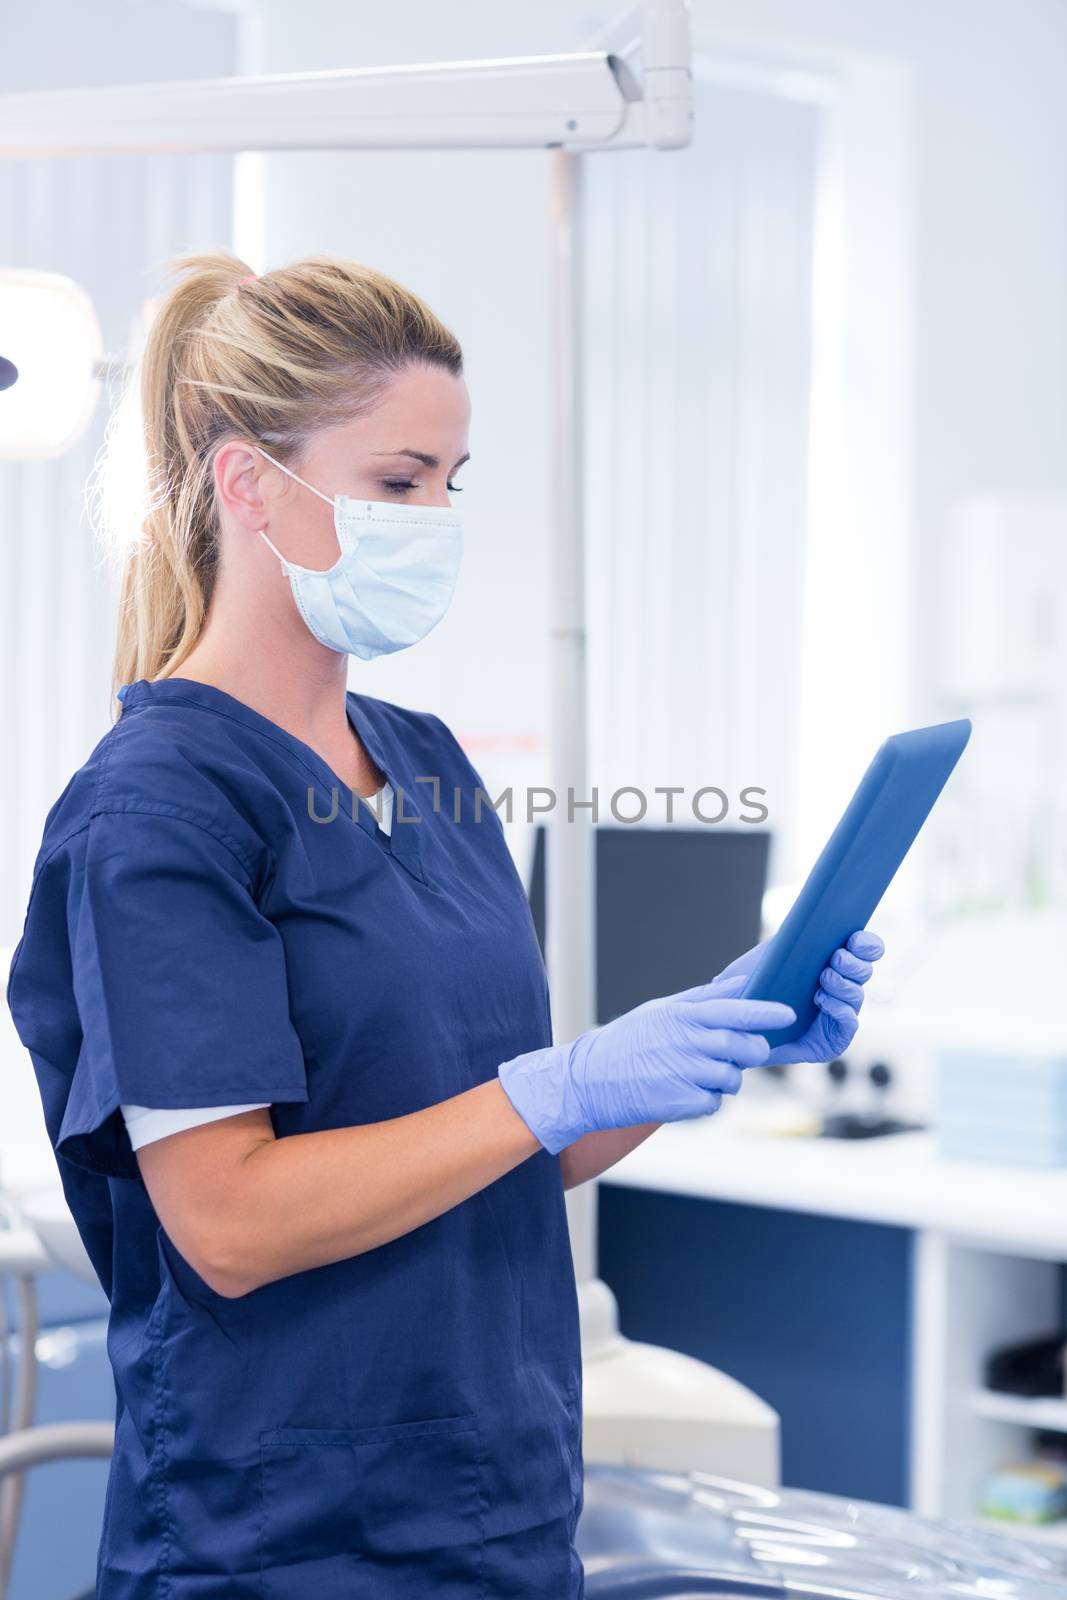 Dentist in mask and blue scrubs using her tablet by Wavebreakmedia